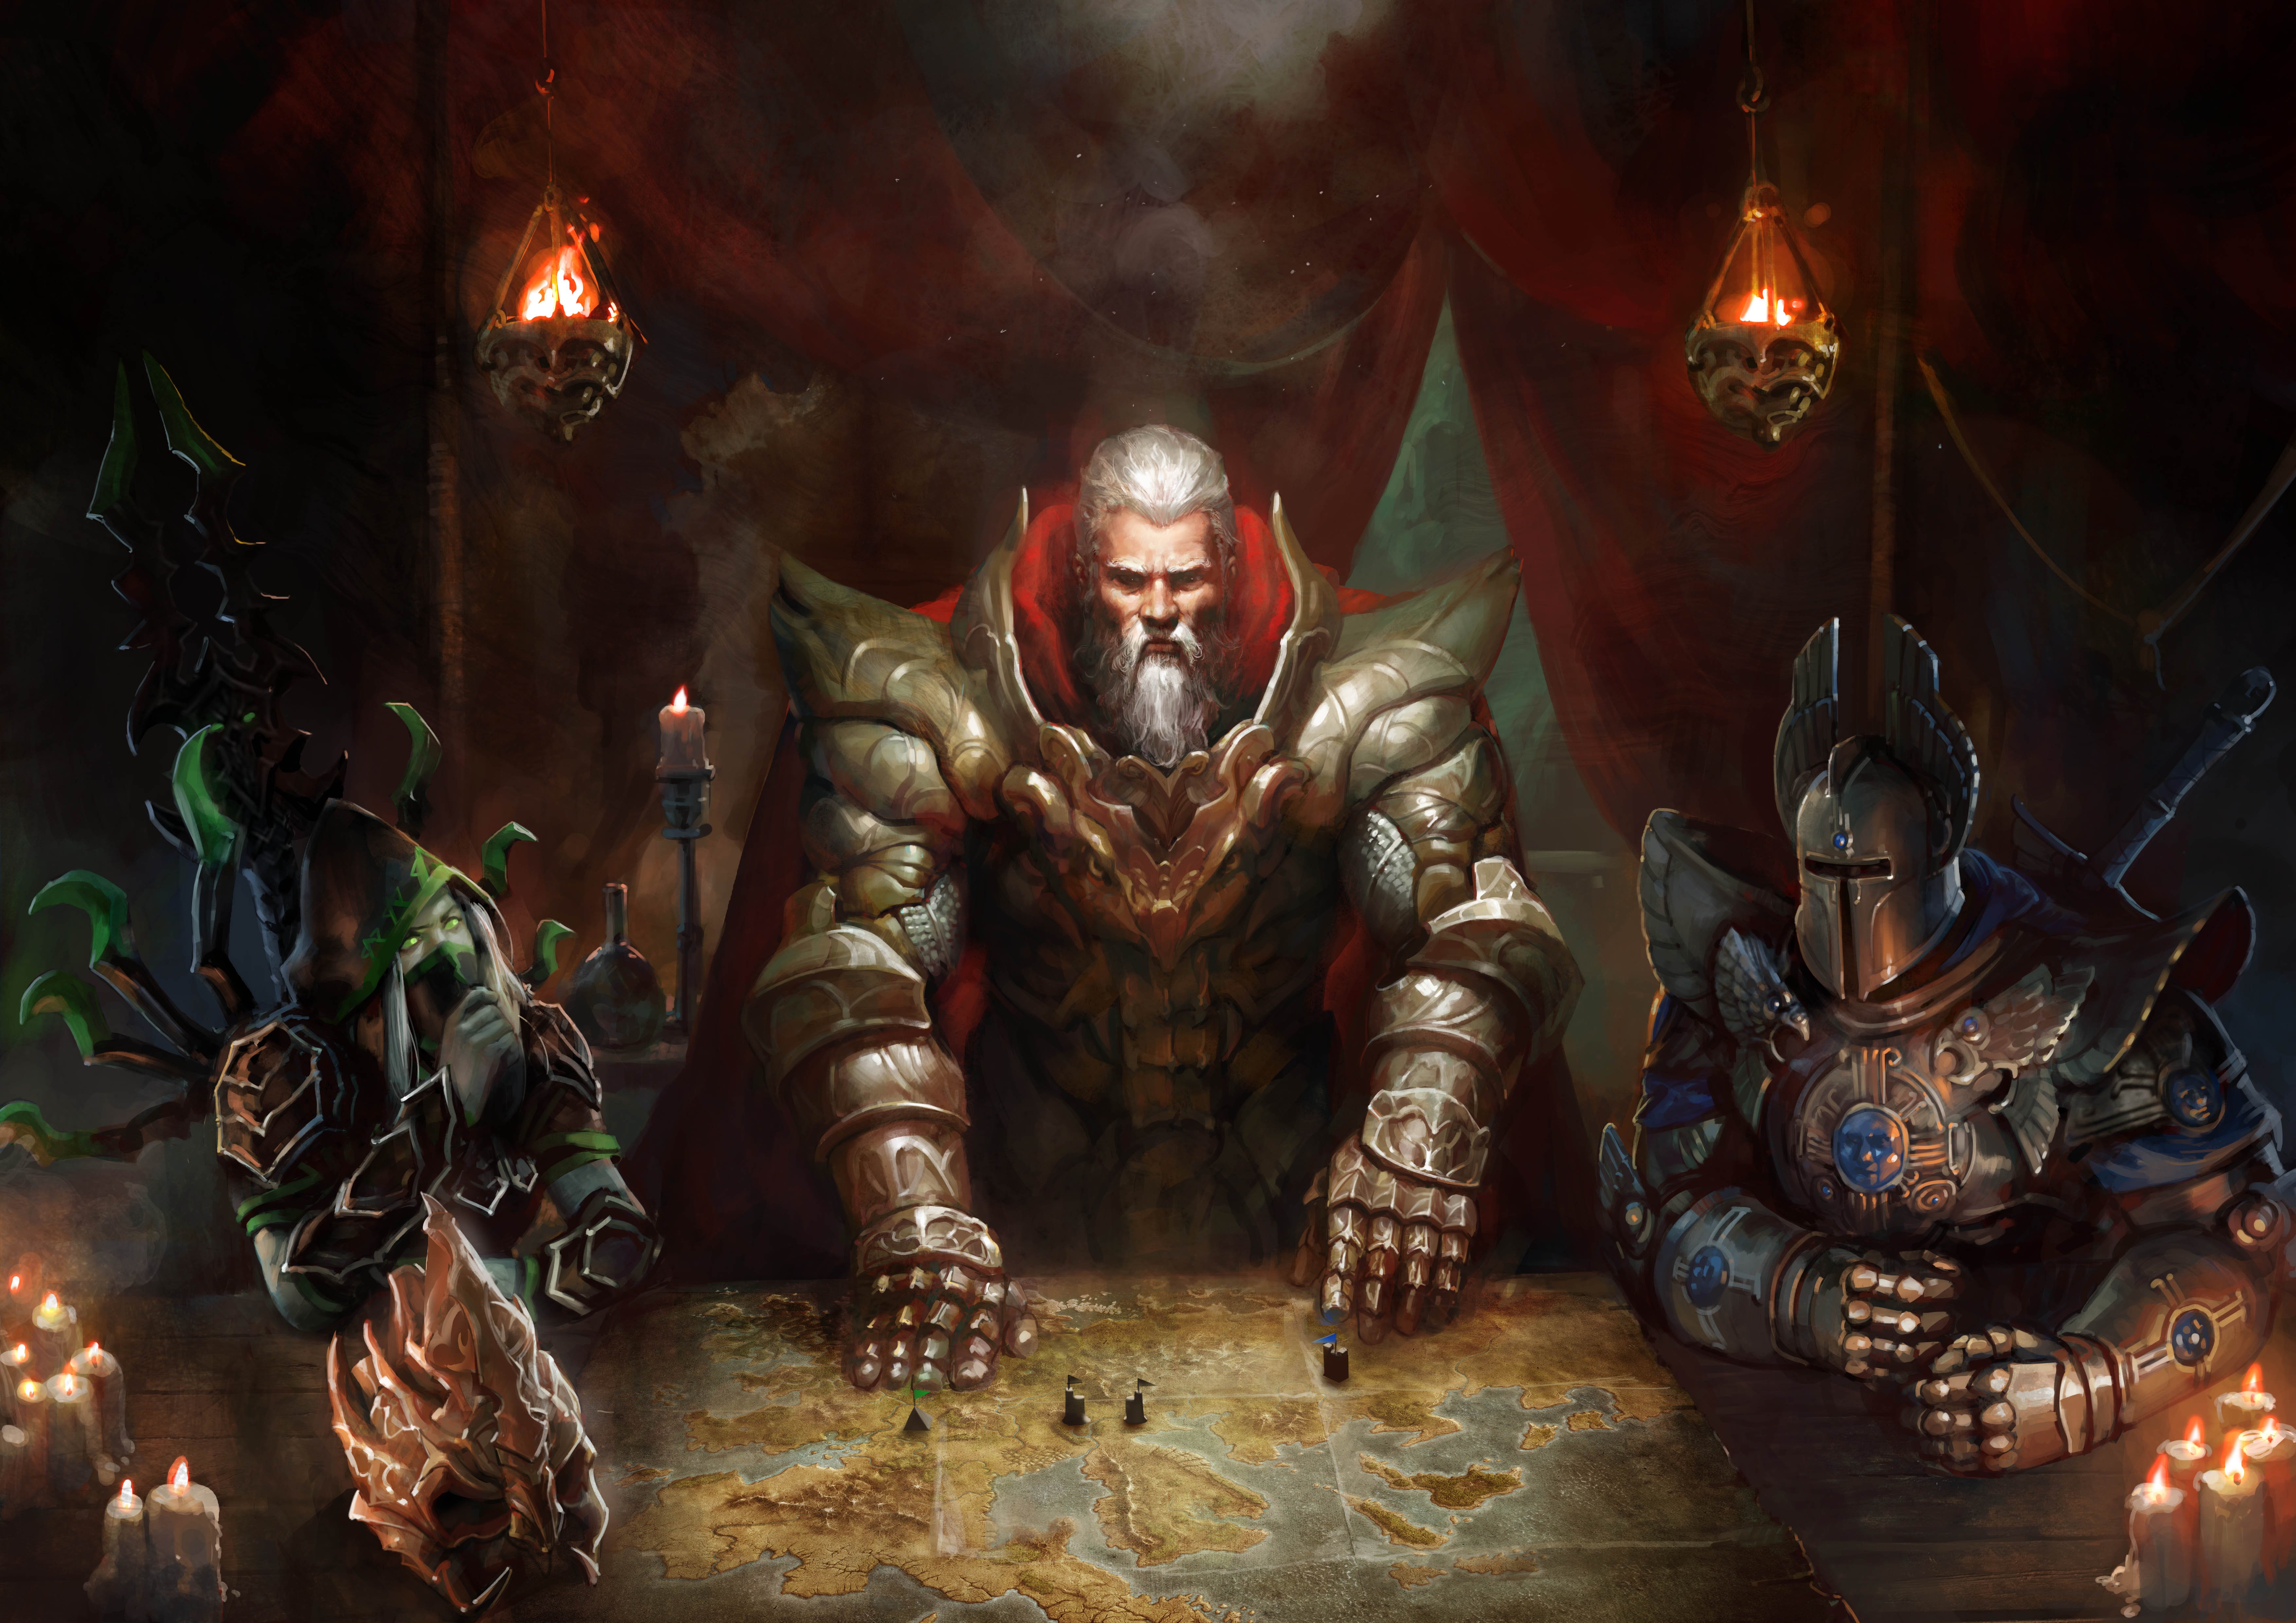 heroes, Might, Magic, Strategy, Fantasy, Fighting, Adventure, Action, Online, 1hmm, King, Knight, Warrior, Armor Wallpaper